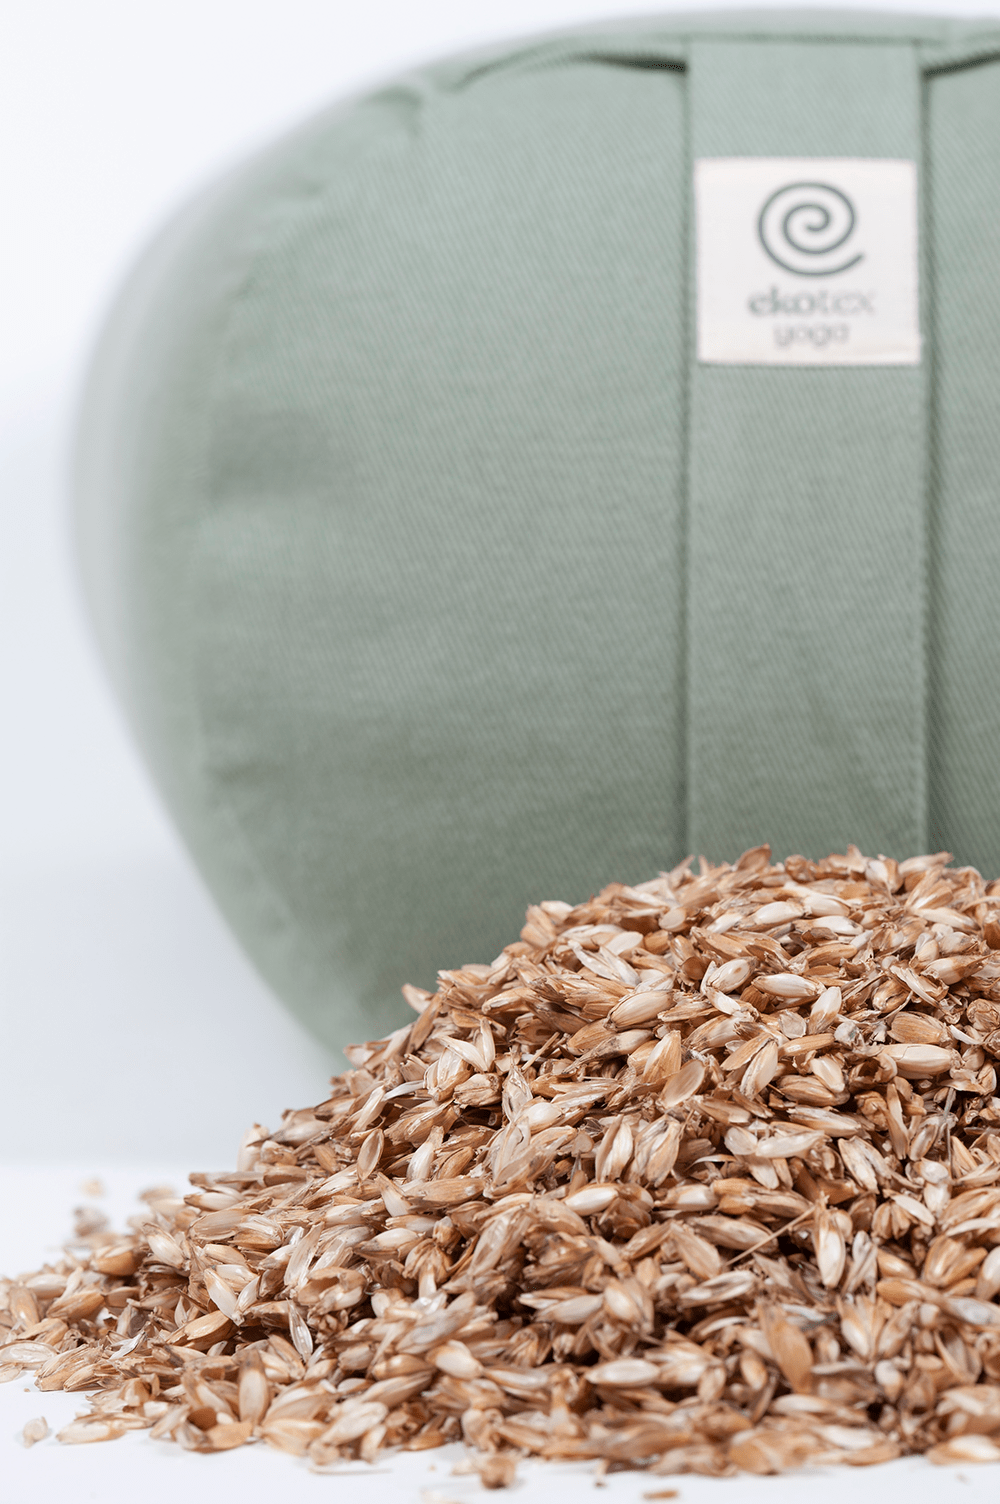 Yoga Bolsters Organic Cotton Yoga Bolsters - Filled with Buckwheat or Spelt